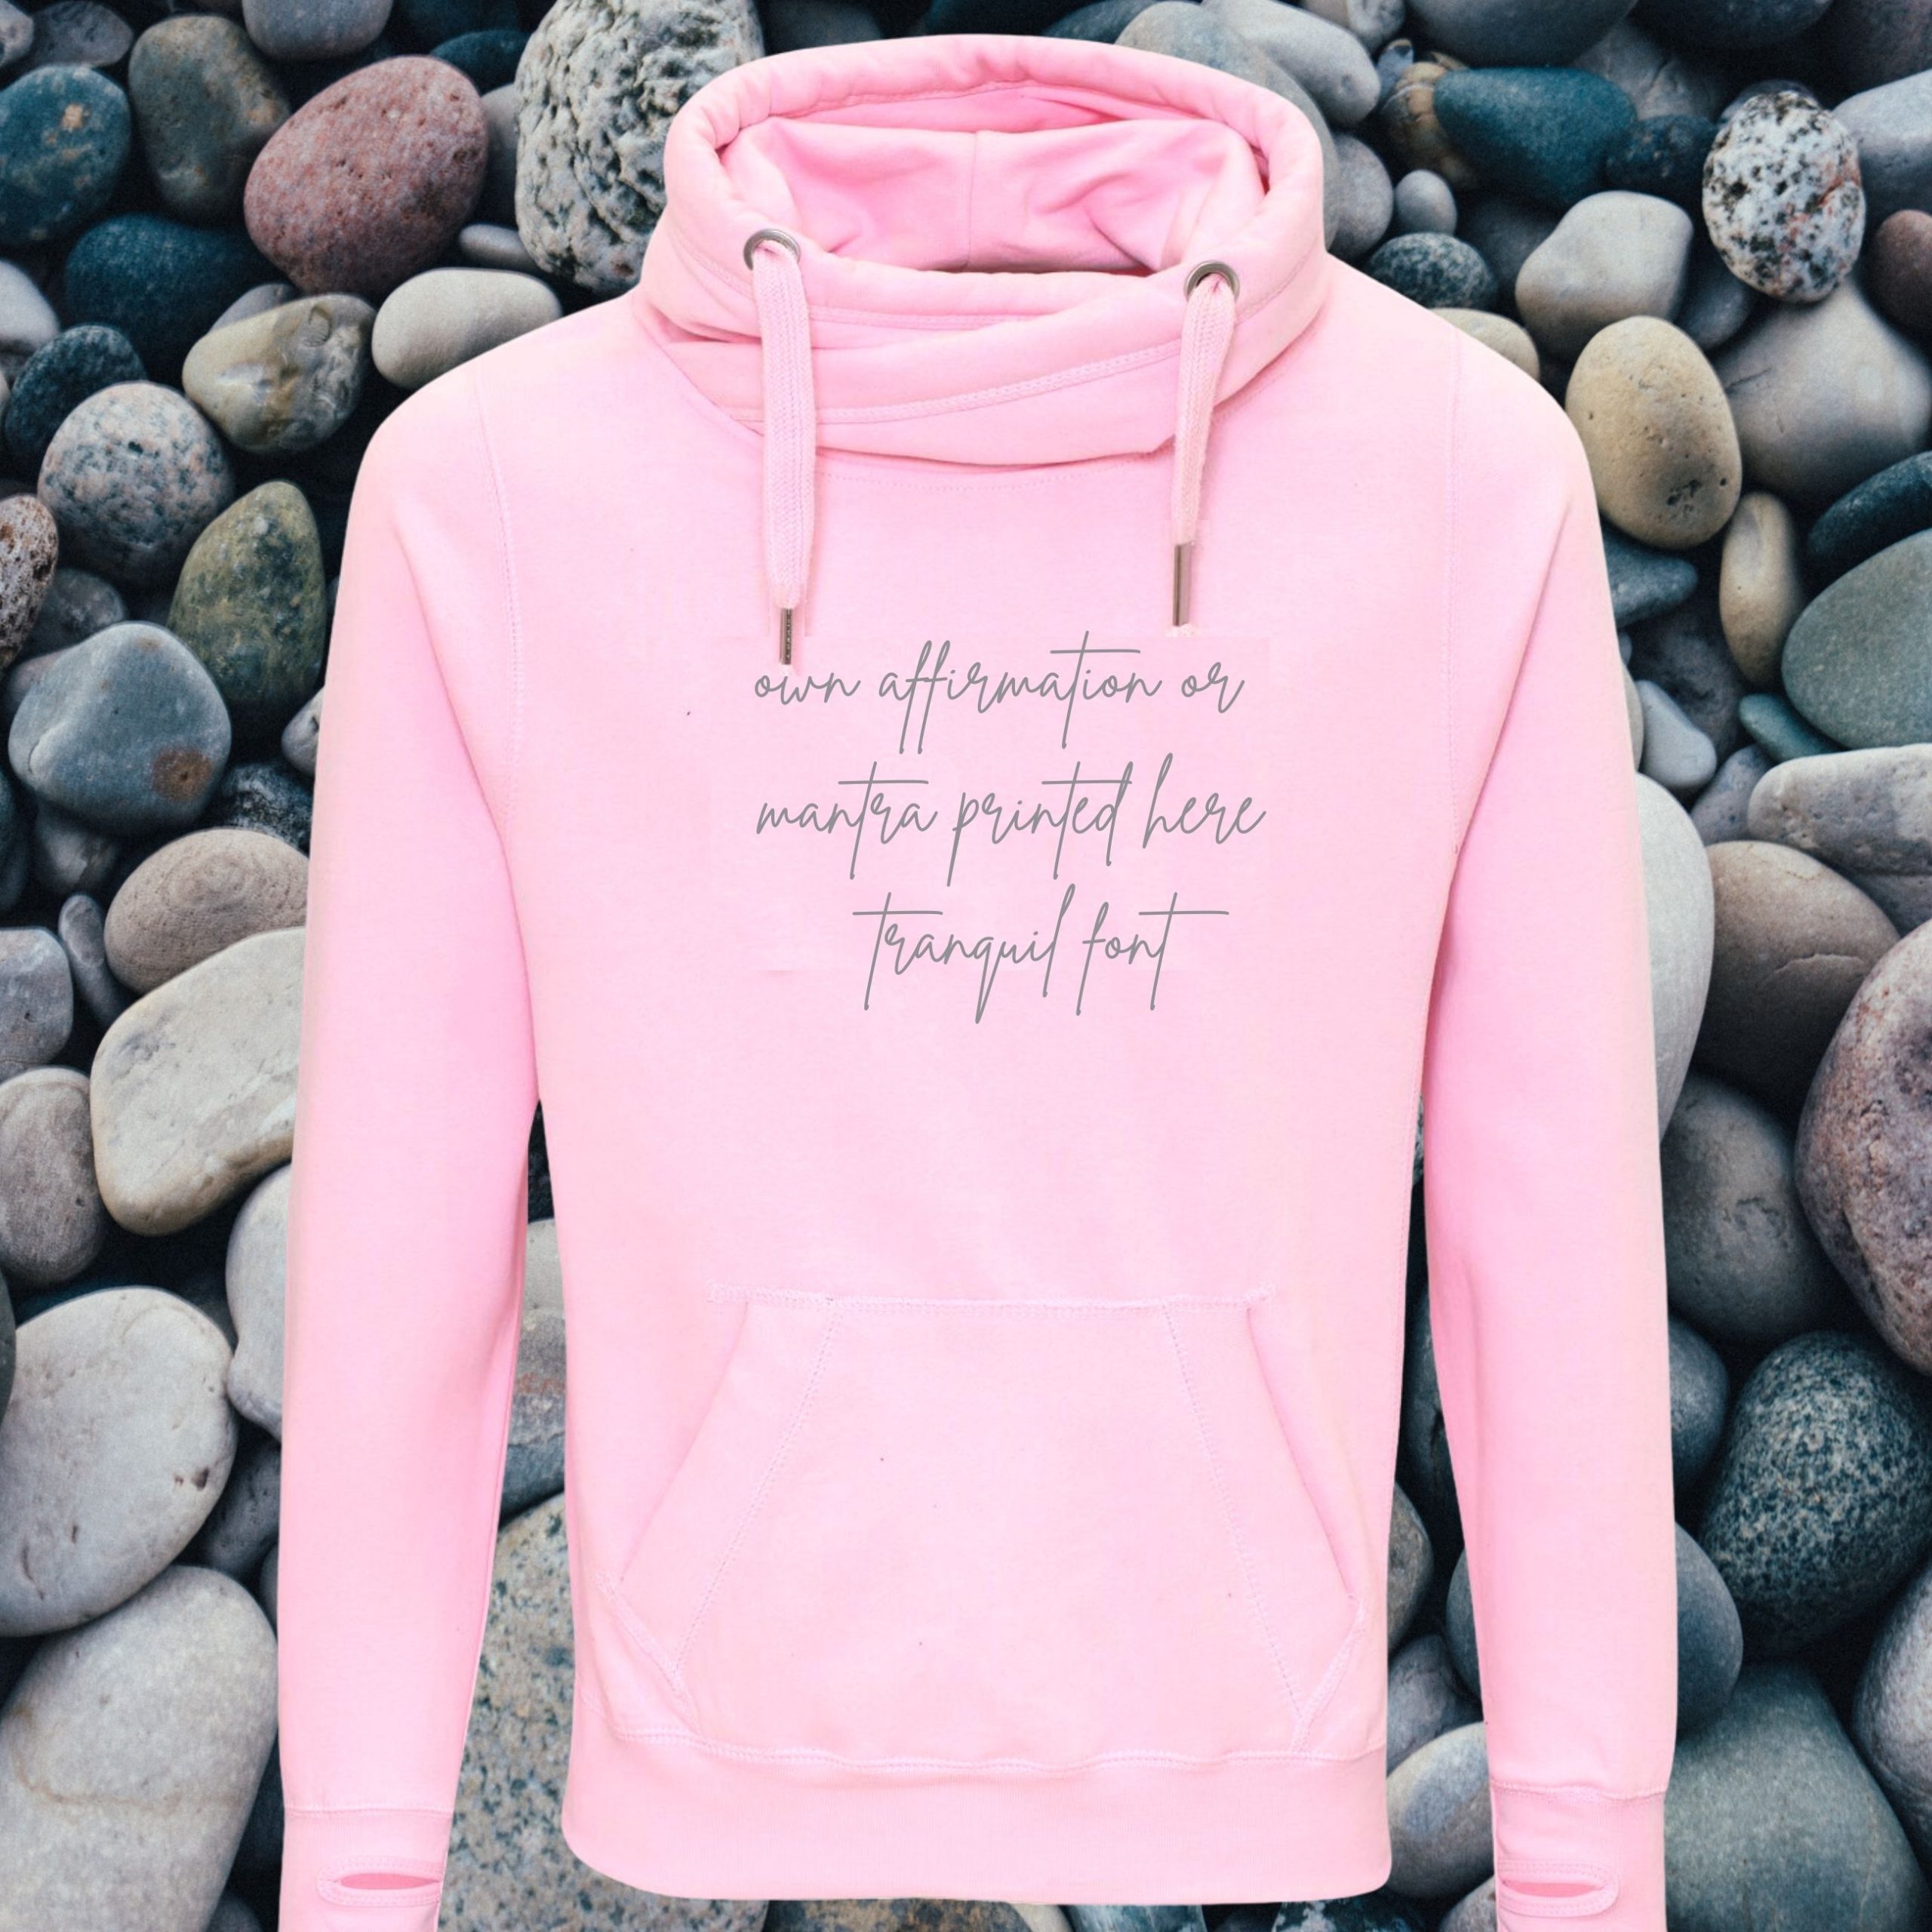 Own Affirmation Cross Neck Hoodie - Tranquil Soul Clothing